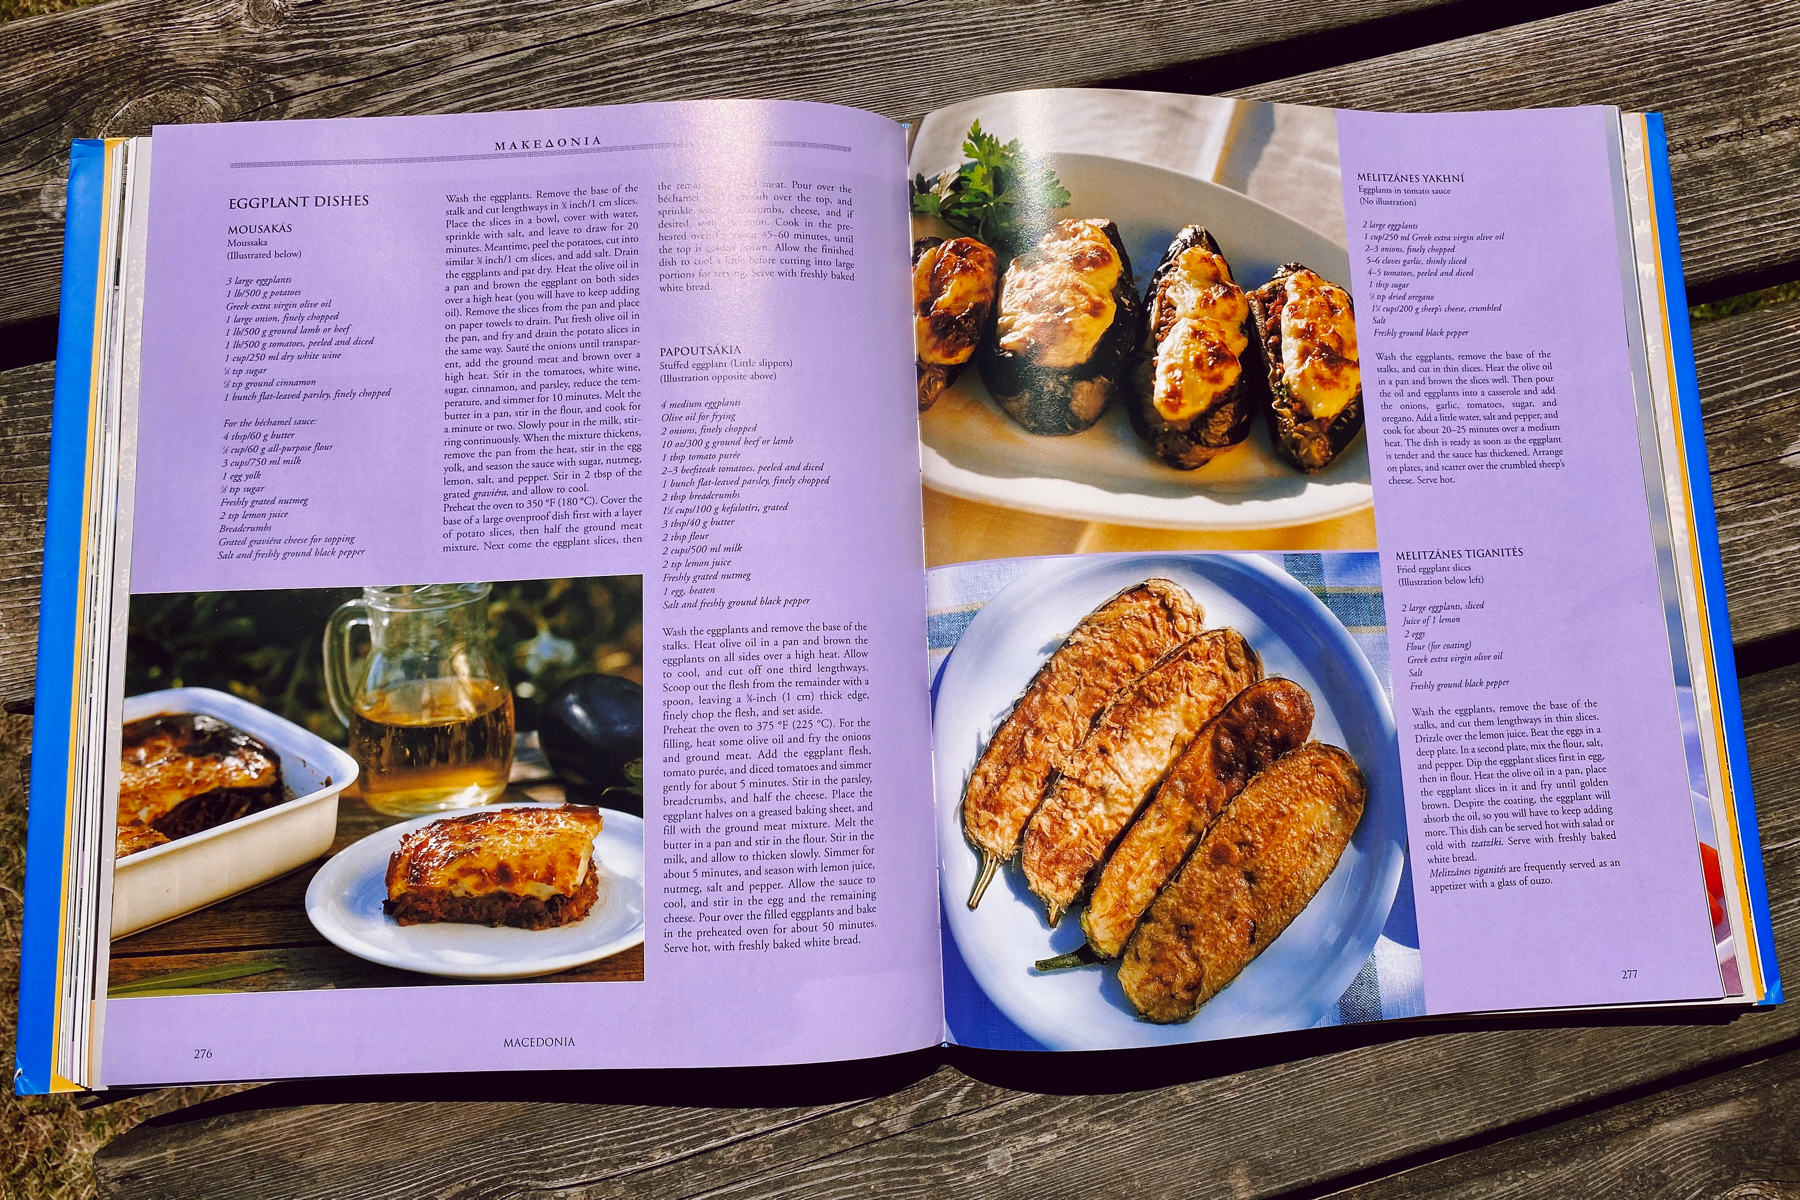 Open Greek cookery book showing eggplant recipes